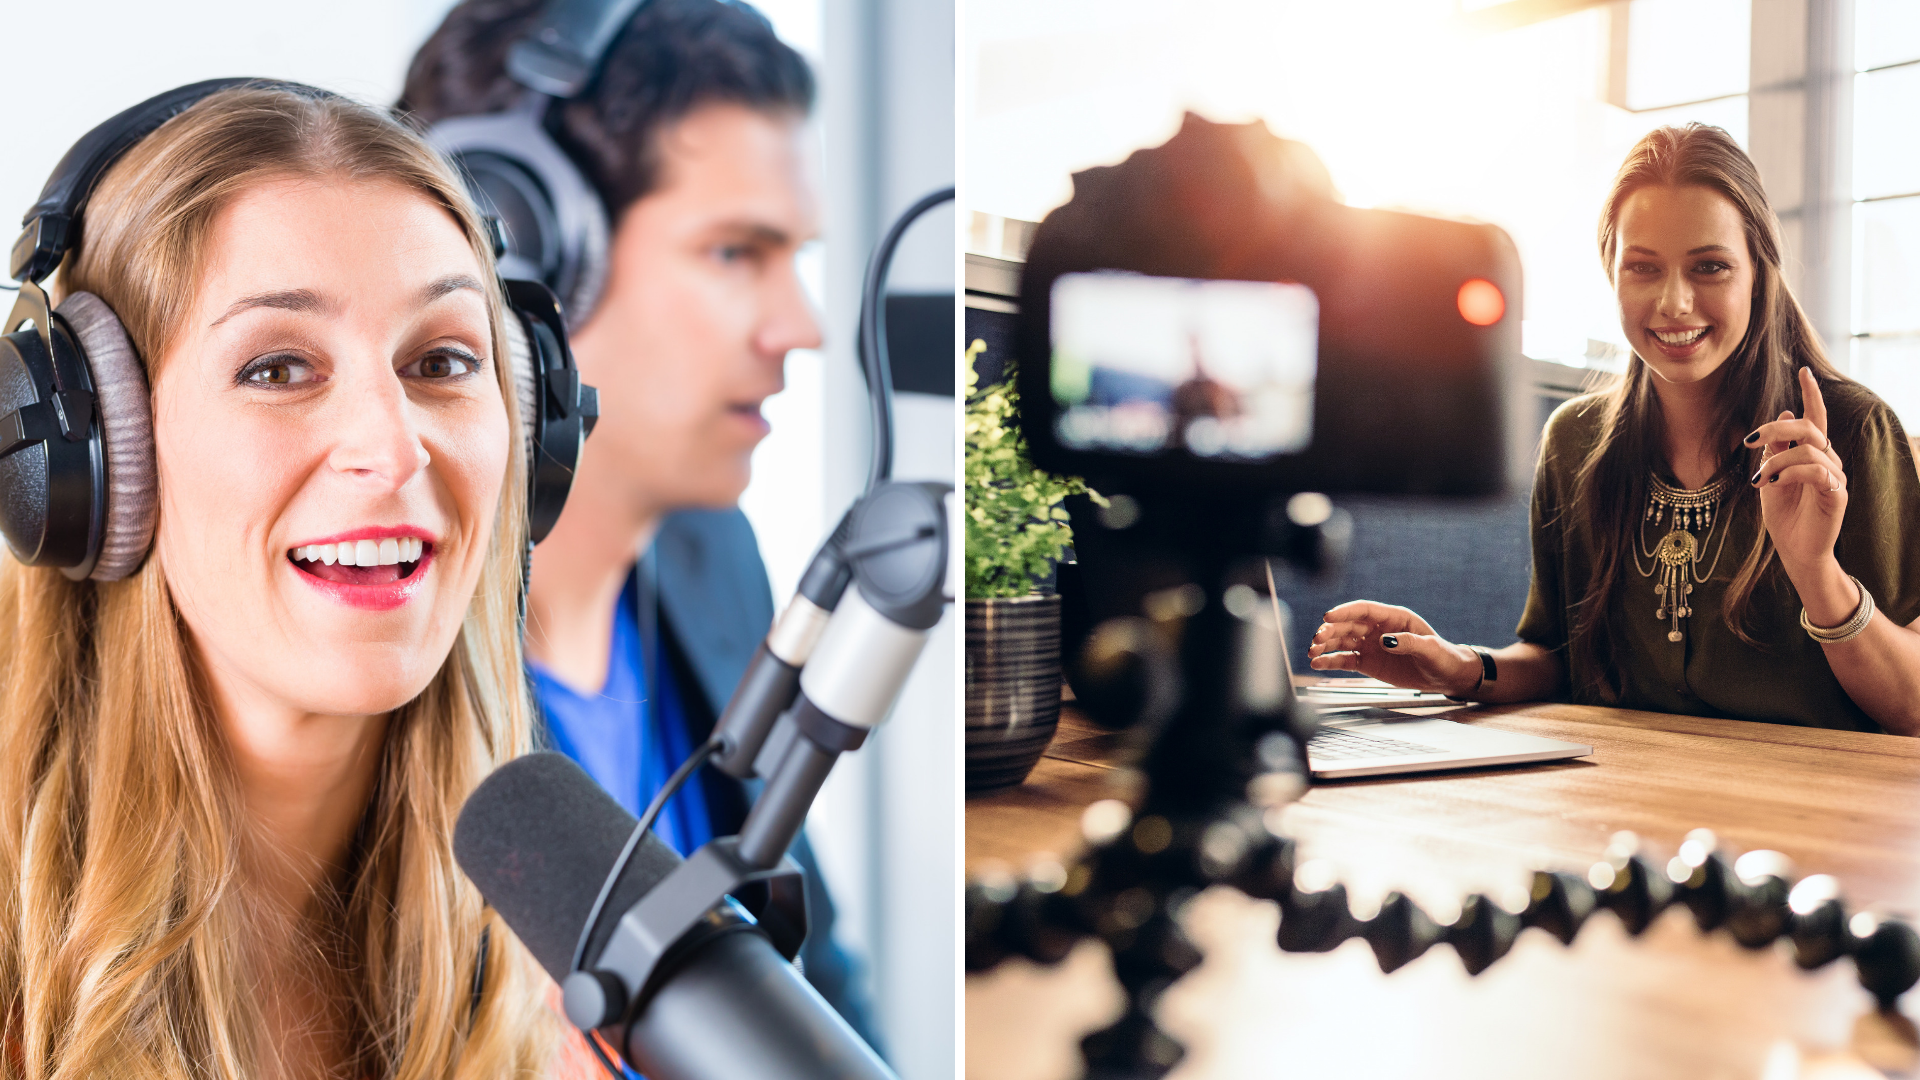 Two images side by side: A woman recording a podcast and a woman recording a video.